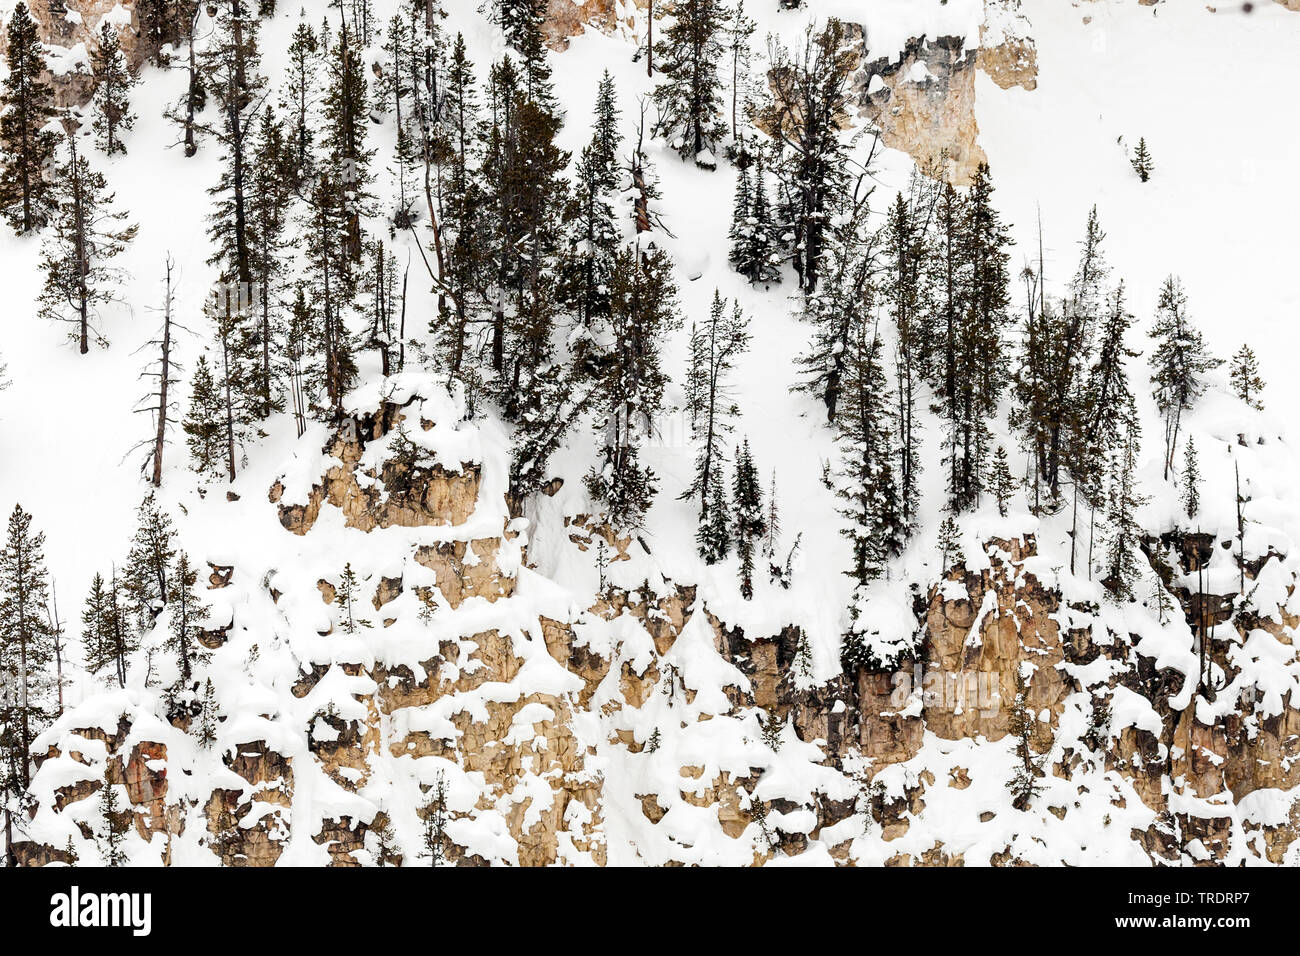 cliff with trees covered in winter, USA, Wyoming, Yellowstone National Park Stock Photo